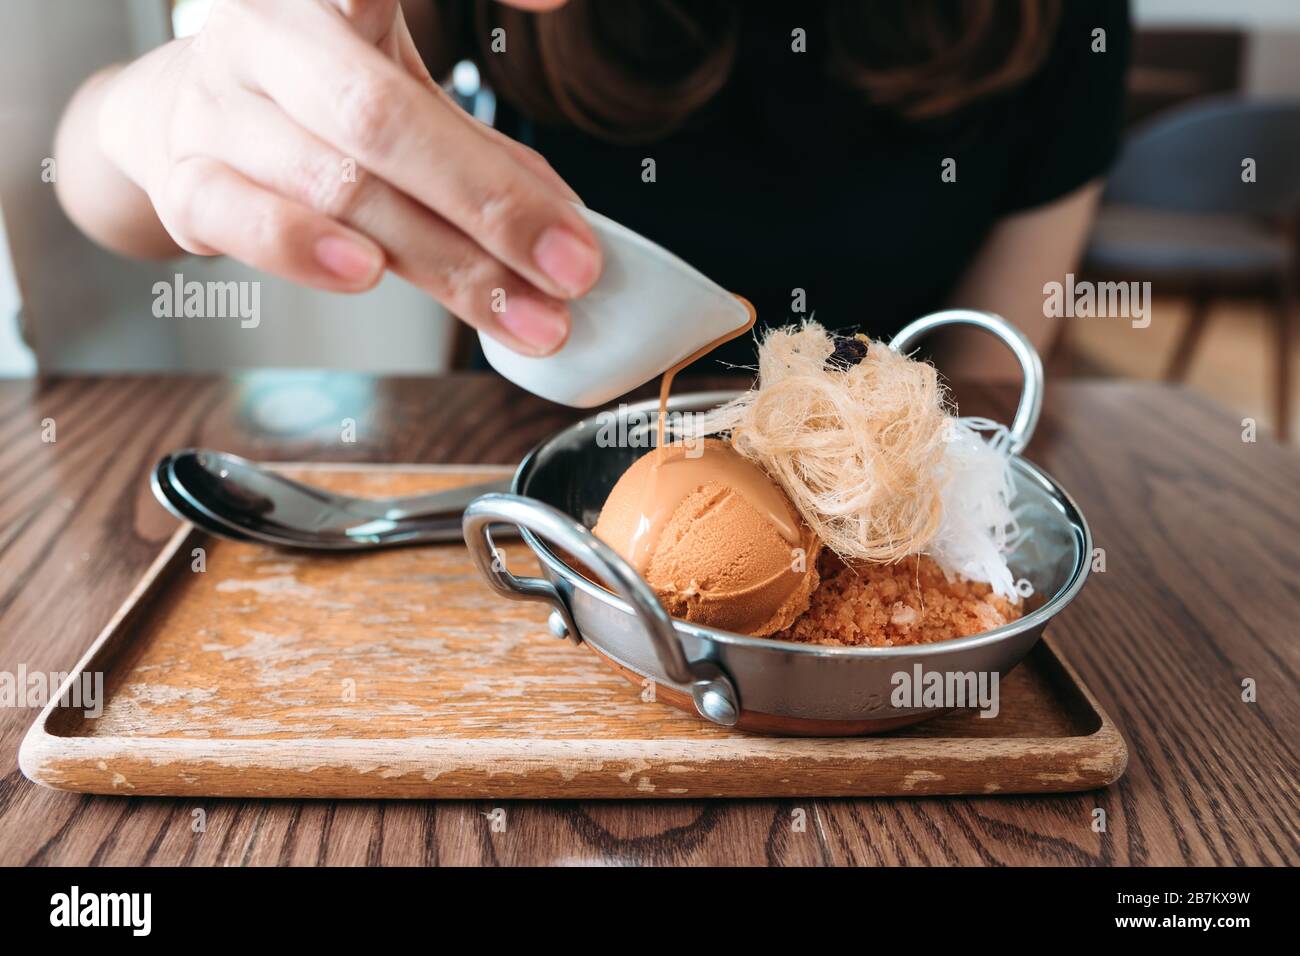 A Woman Pouring Syrup Into Thai Tea Ice Cream And Cotton Candy In Cafe Stock Photo Alamy,Electric Grills